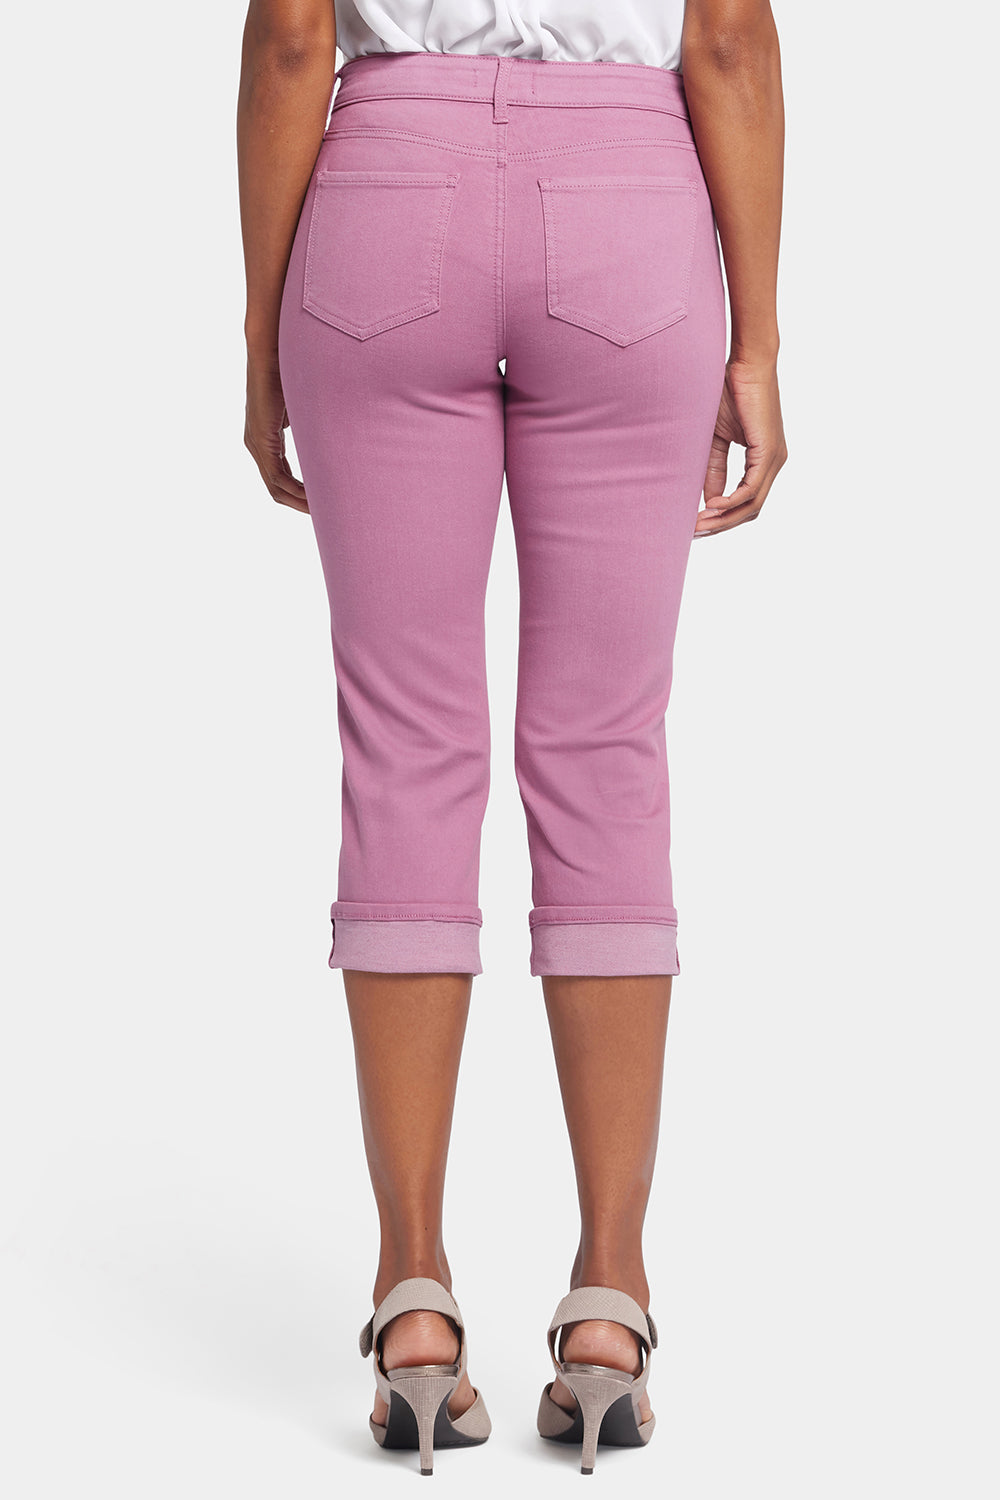 NYDJ Marilyn Straight Crop Jeans In Cool Embrace® Denim With Cuffs - Mauve Haze